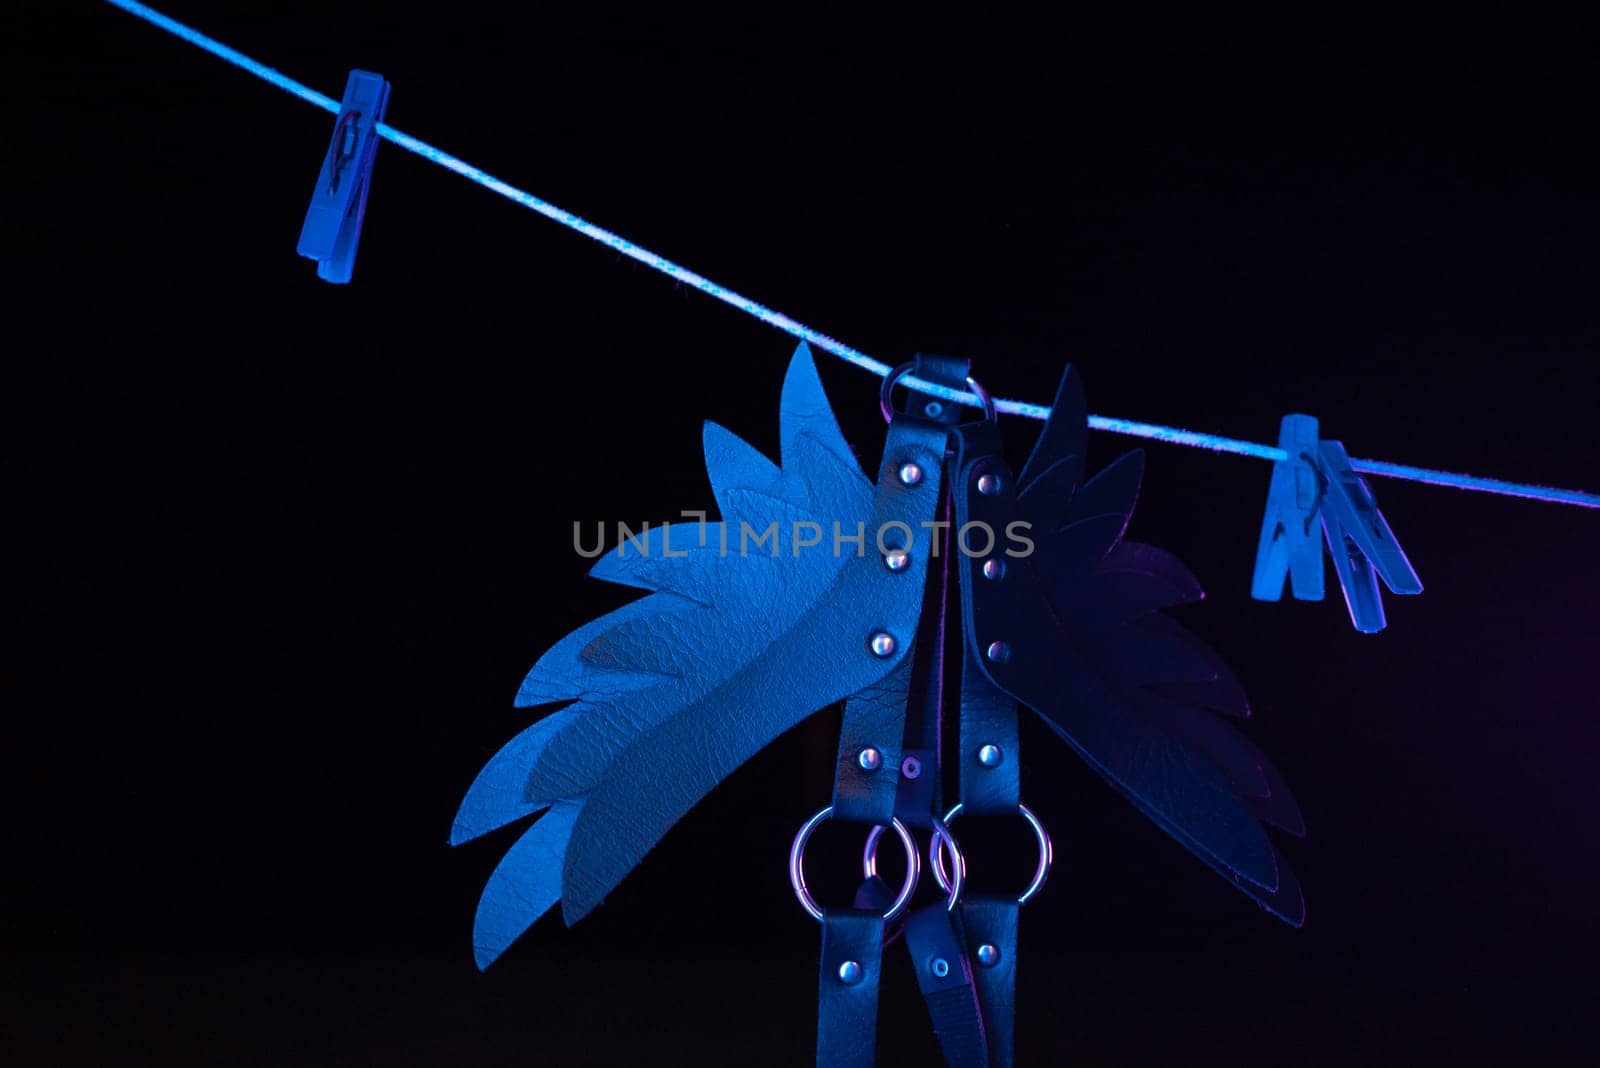 bdsm leather shoulder straps in the shape of wings hanging on clothesline in neon light on a black background, conceptual photos